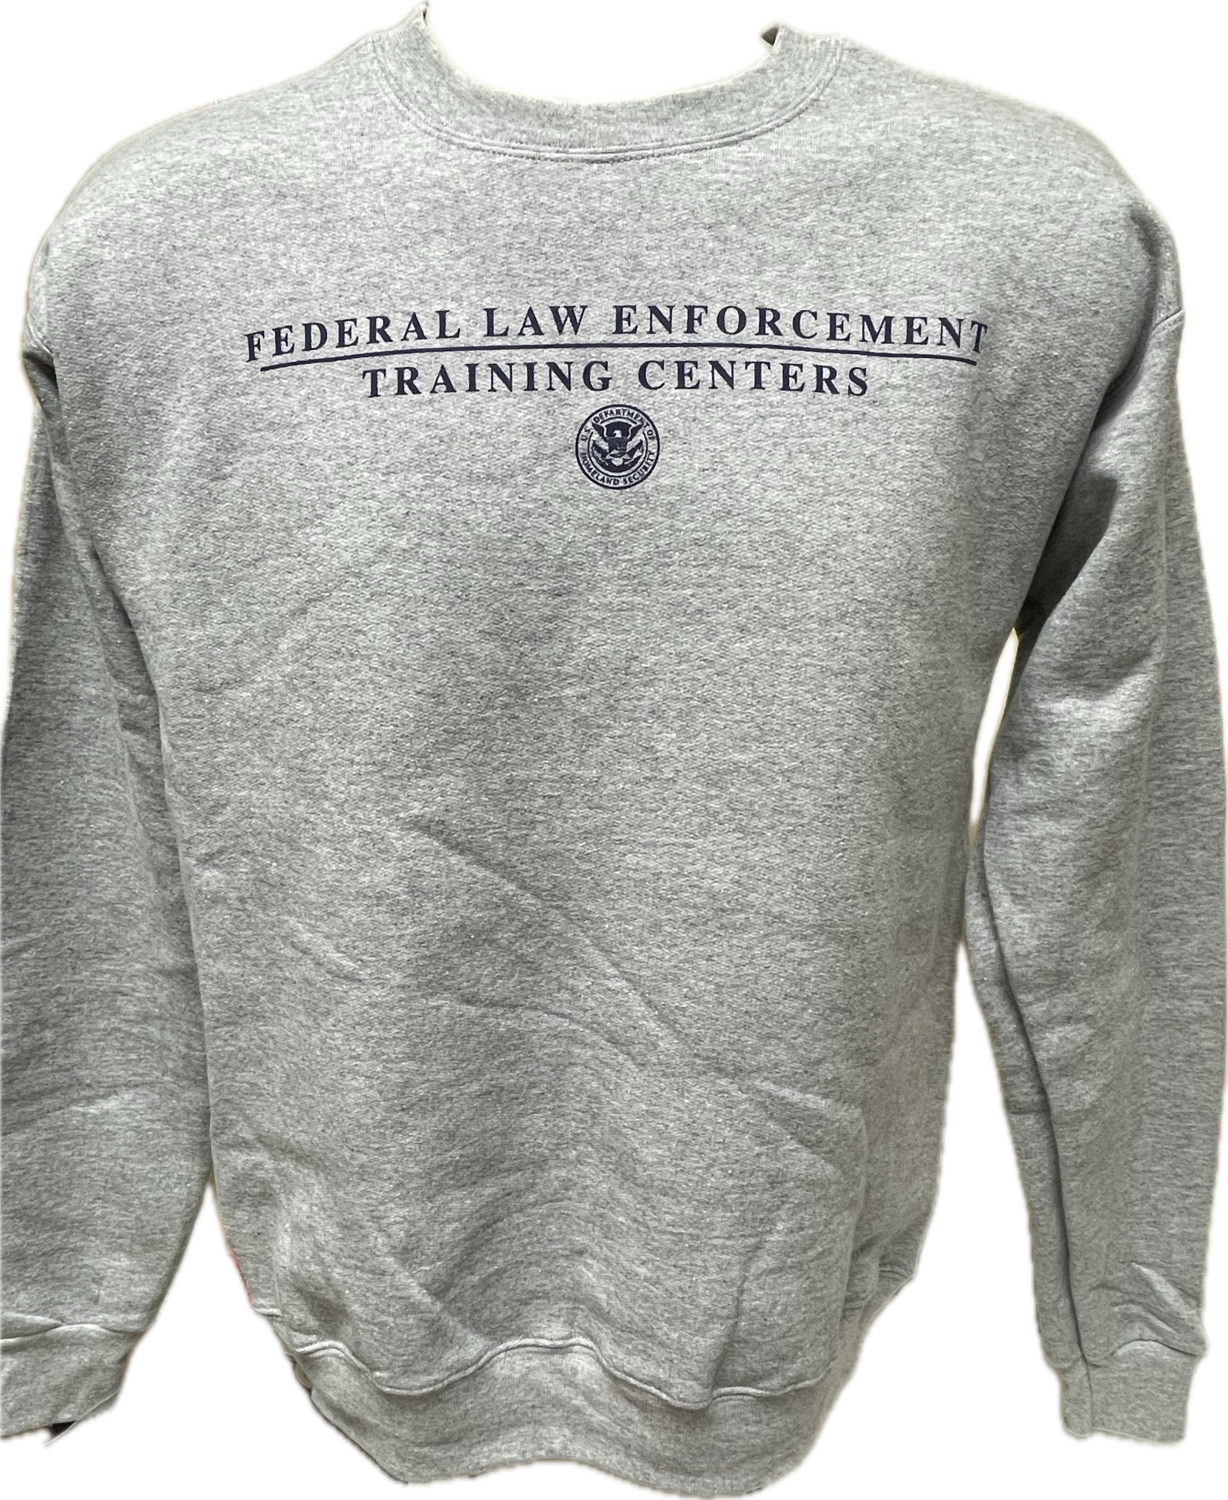 DHS SMALL CENTER CREW NECK